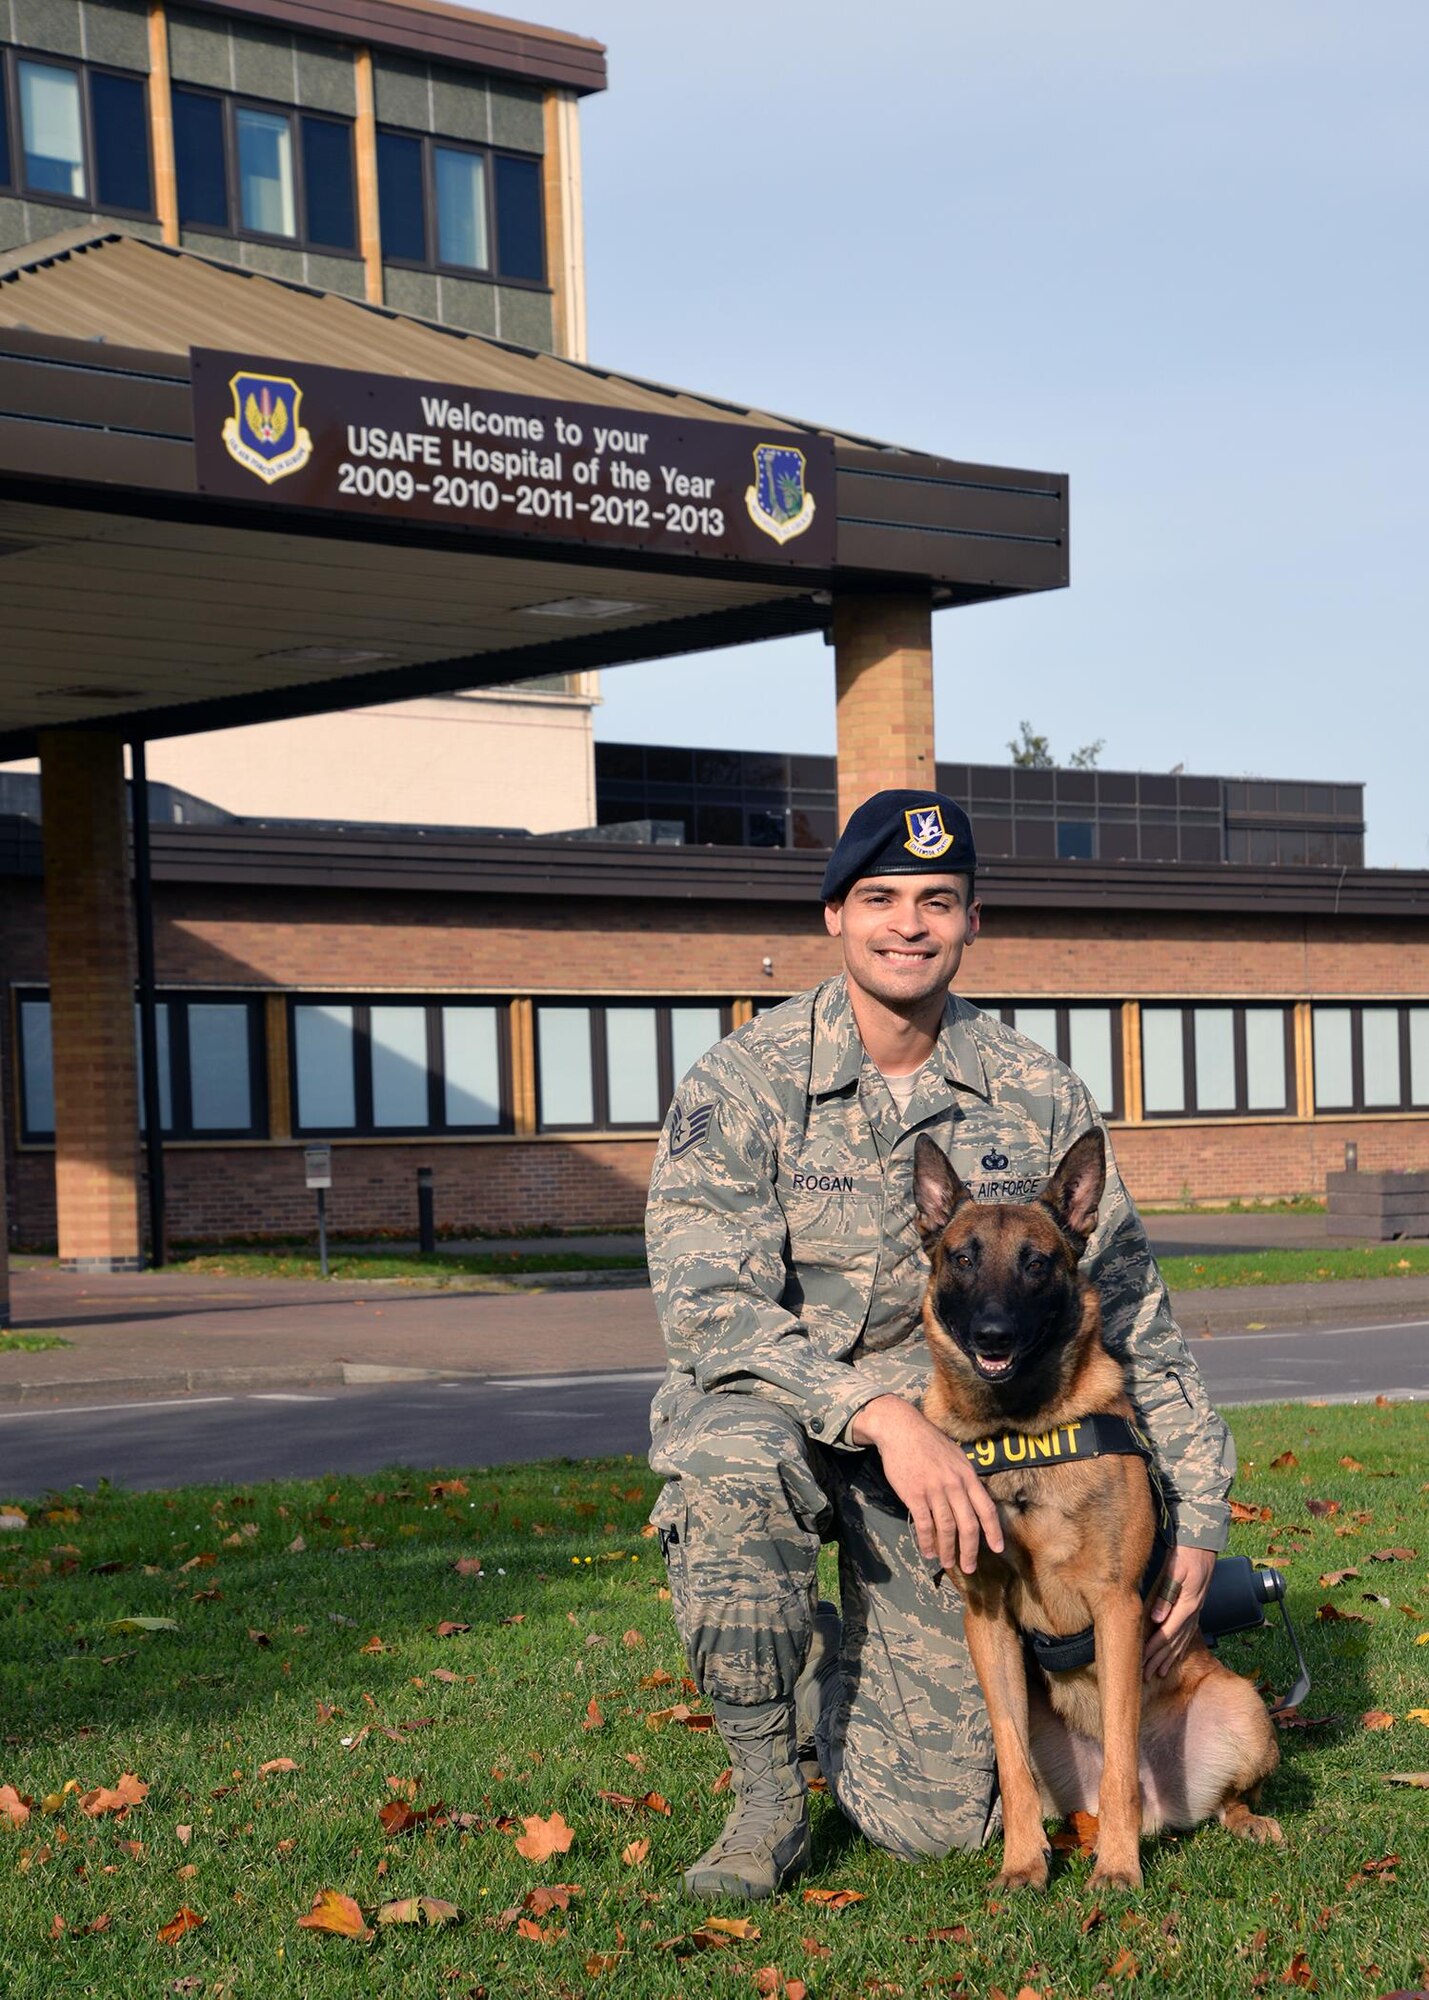 U.S. Air Force Staff Sgt. Alexandre Rogan, 100th Security Forces Squadron Military Working Dog handler and trainer, and his partner, MWD Oorion, pose for a photo Oct. 30, 2017, outside the 48th Medical Group on RAF Lakenheath, England.  Rogan was recently accepted to become an officer in the Medical Service Corps – an extremely competitive career field of just 950 people – and underwent job-shadowing for six months at the medical group as an additional part of his submission package. (U.S. Air Force photo by Karen Abeyasekere)